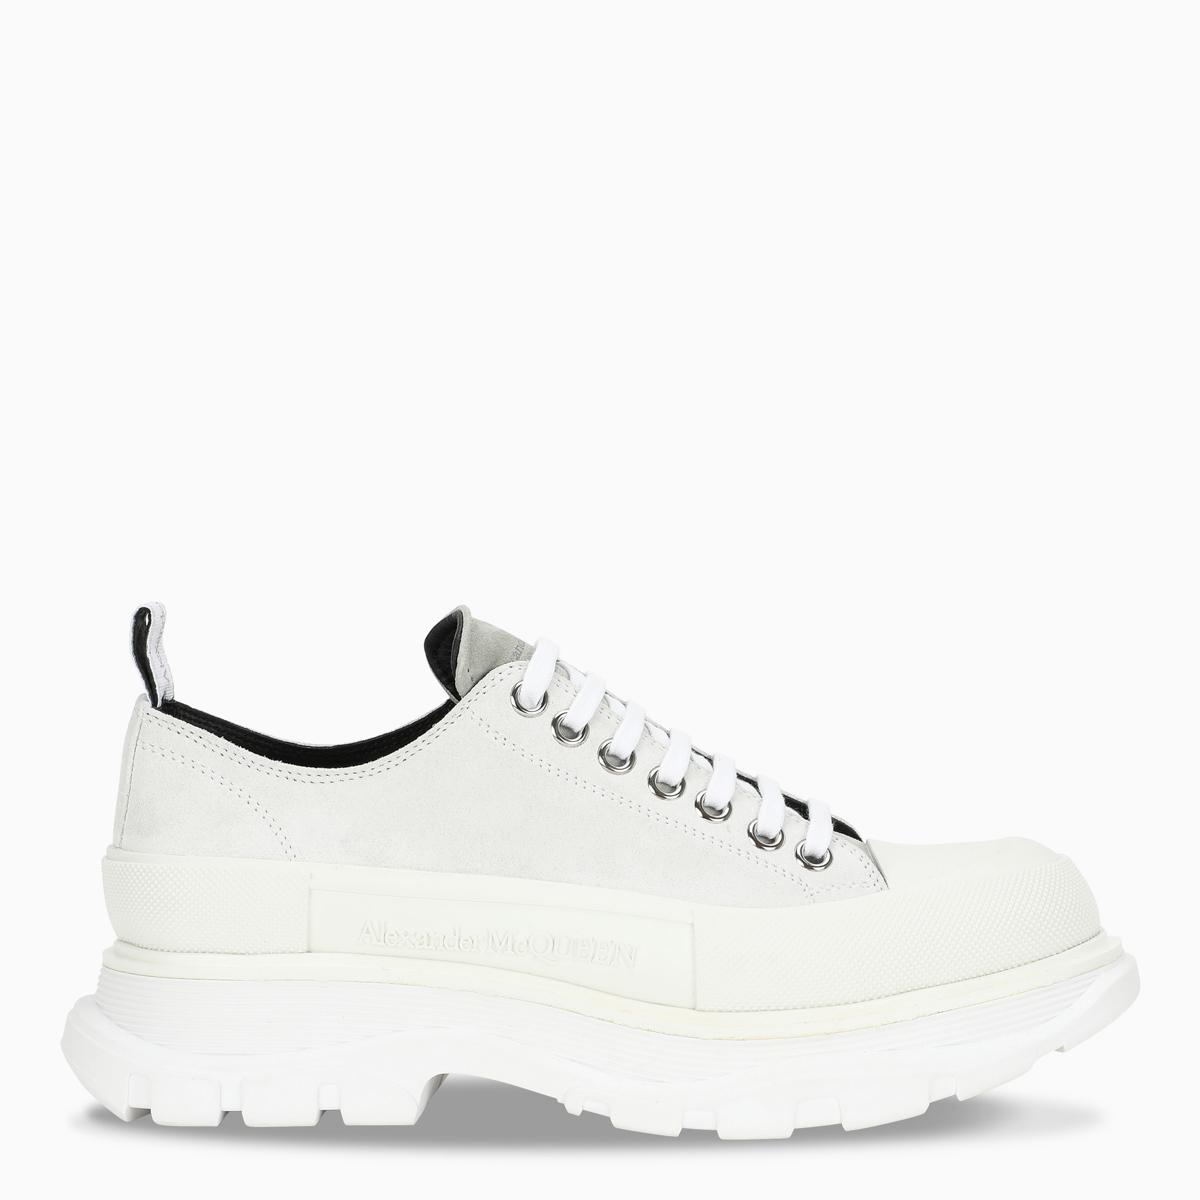 Alexander McQueen Men's White Leather Tread Slick Lace-up Shoes for Men ...